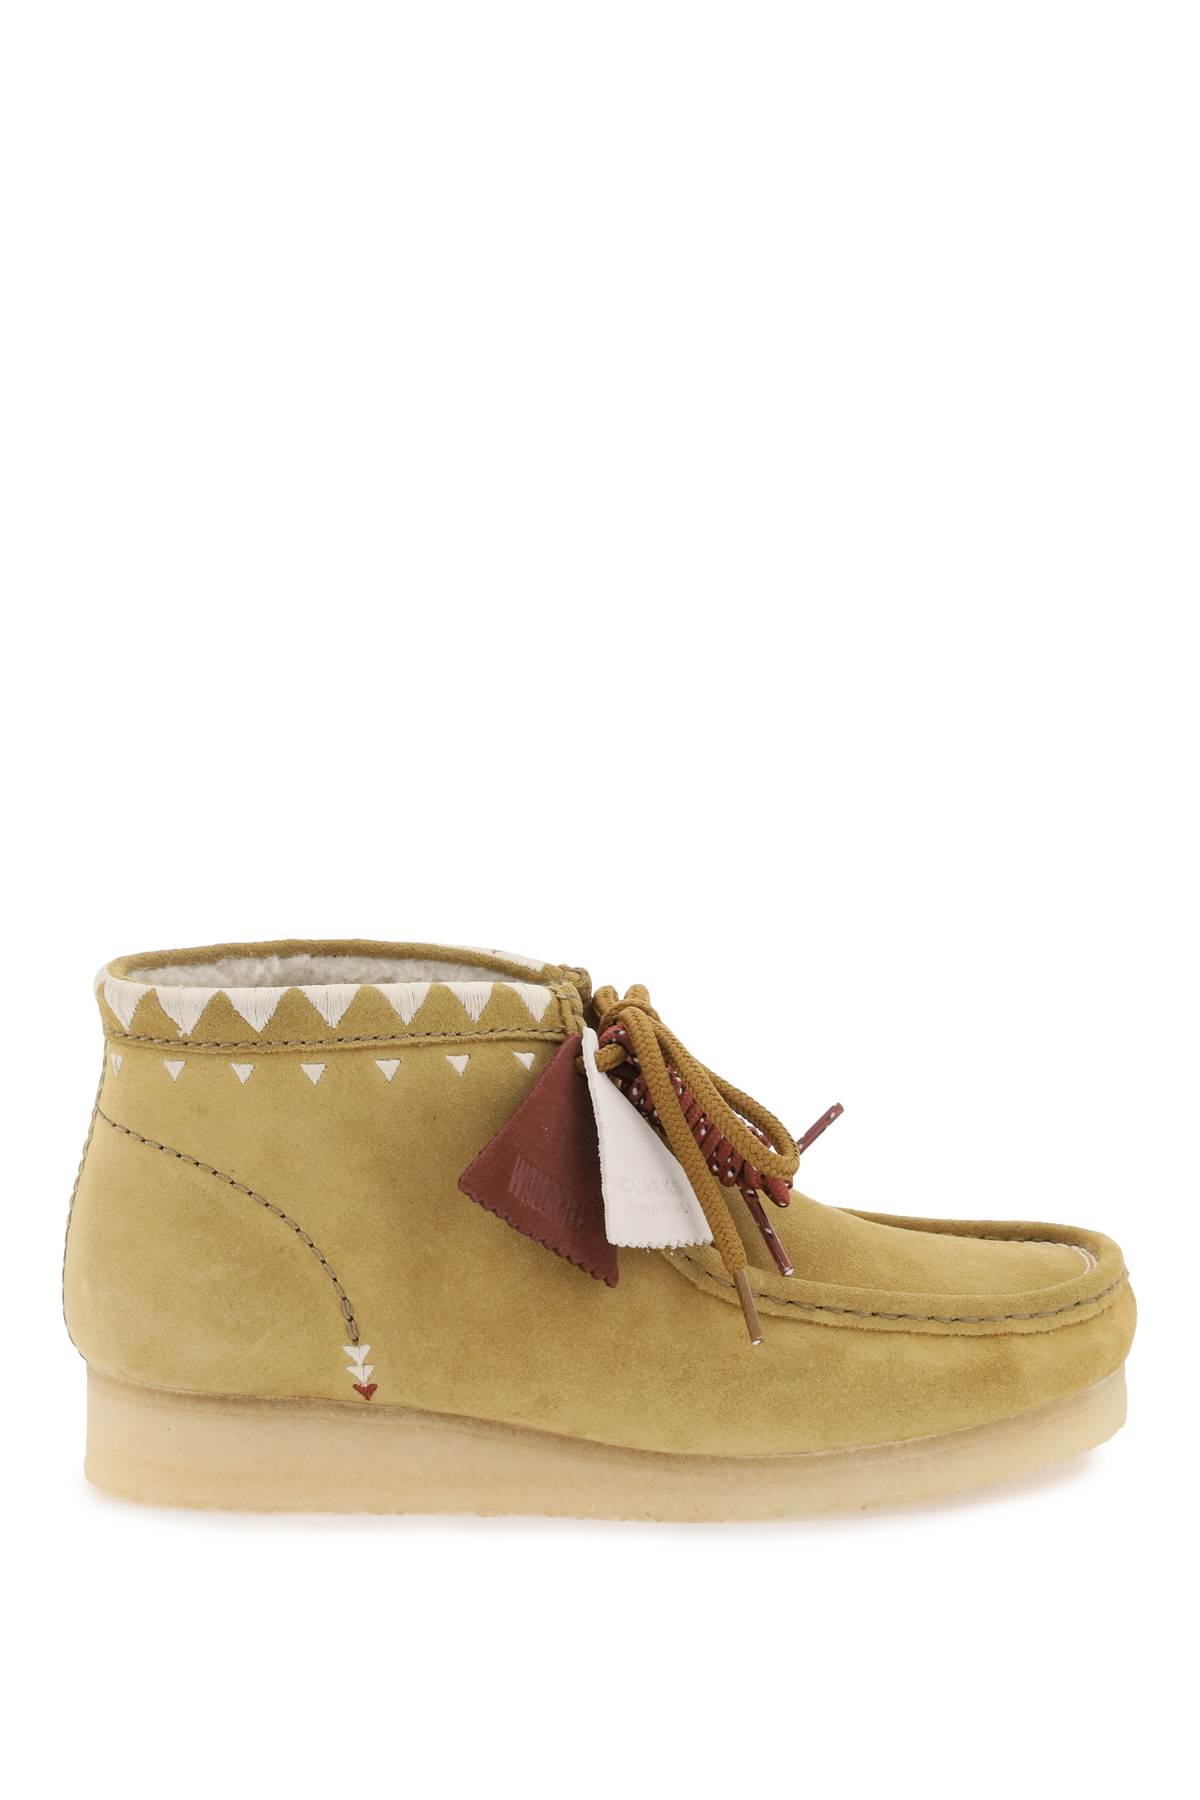 wallabee Lace-up Boots